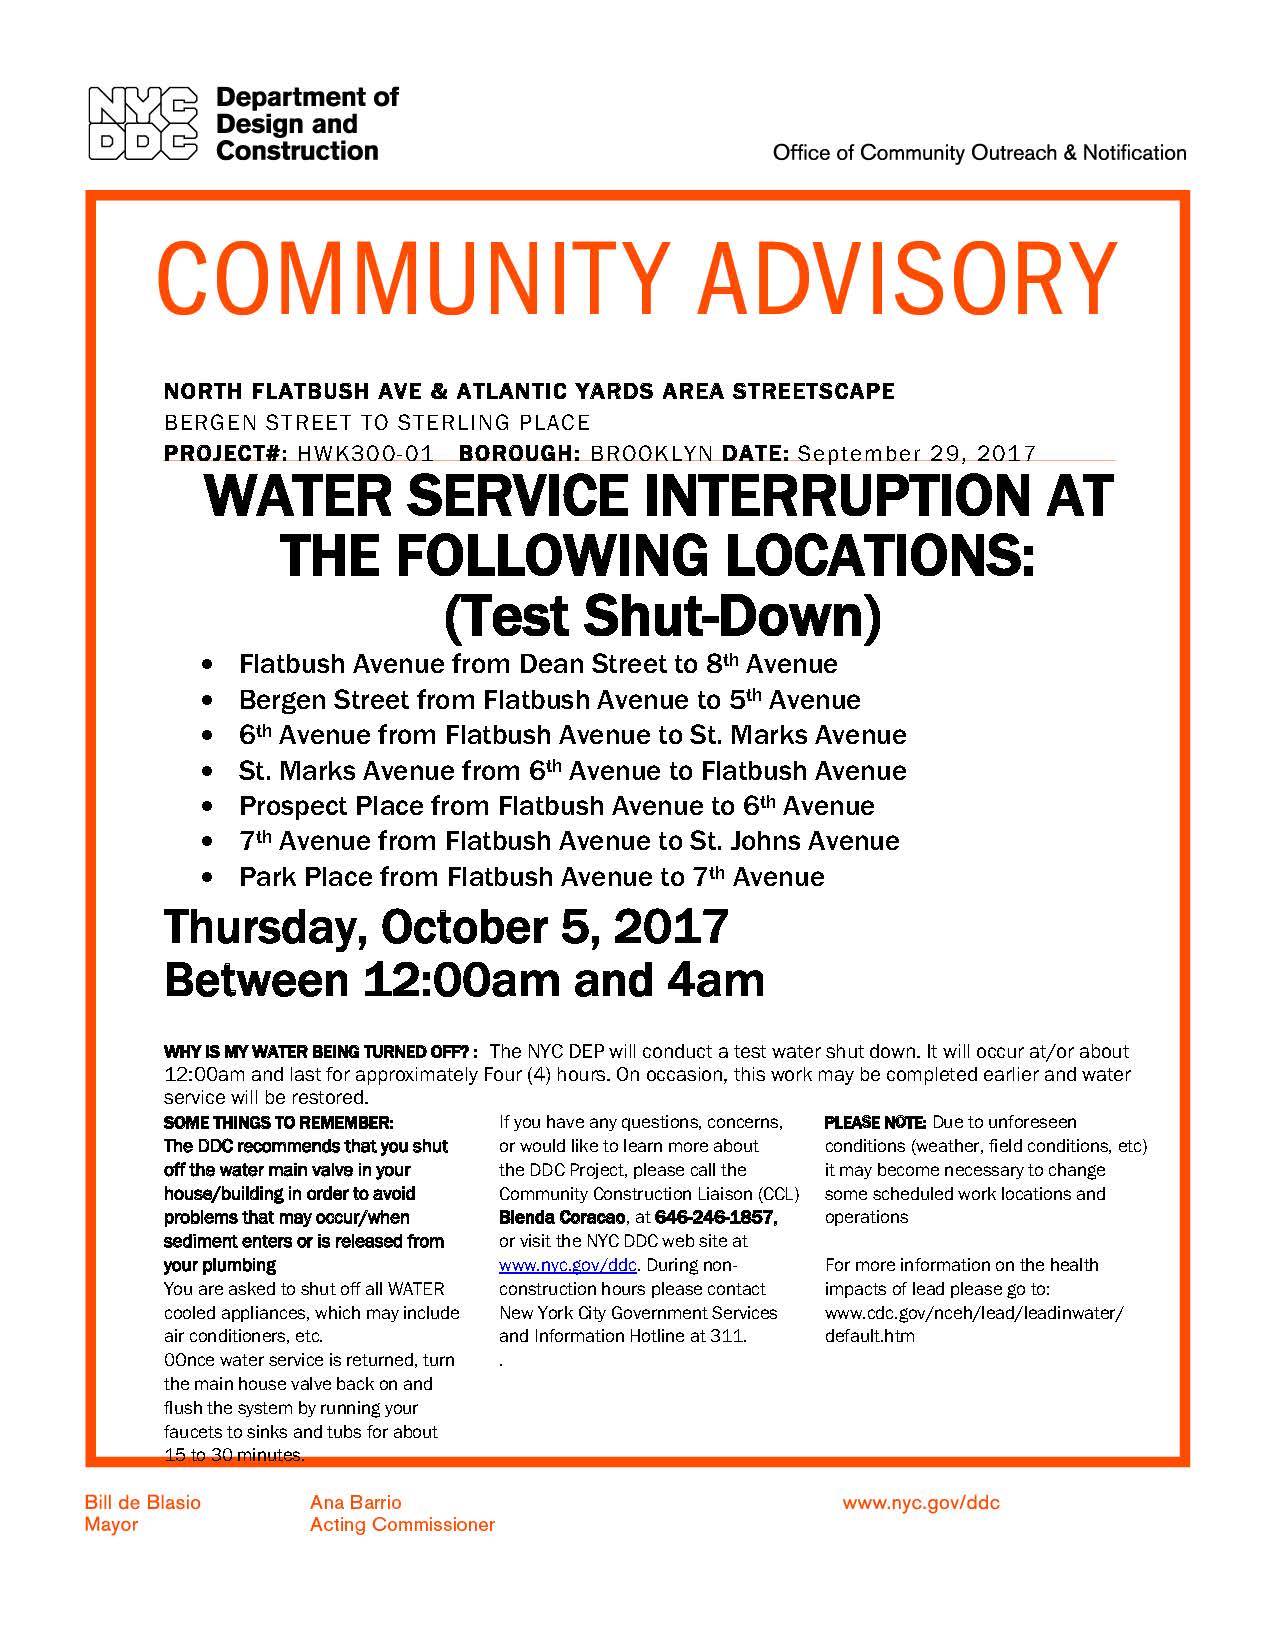 New York City Water Supply - NYS Deptof Environmental Conservation